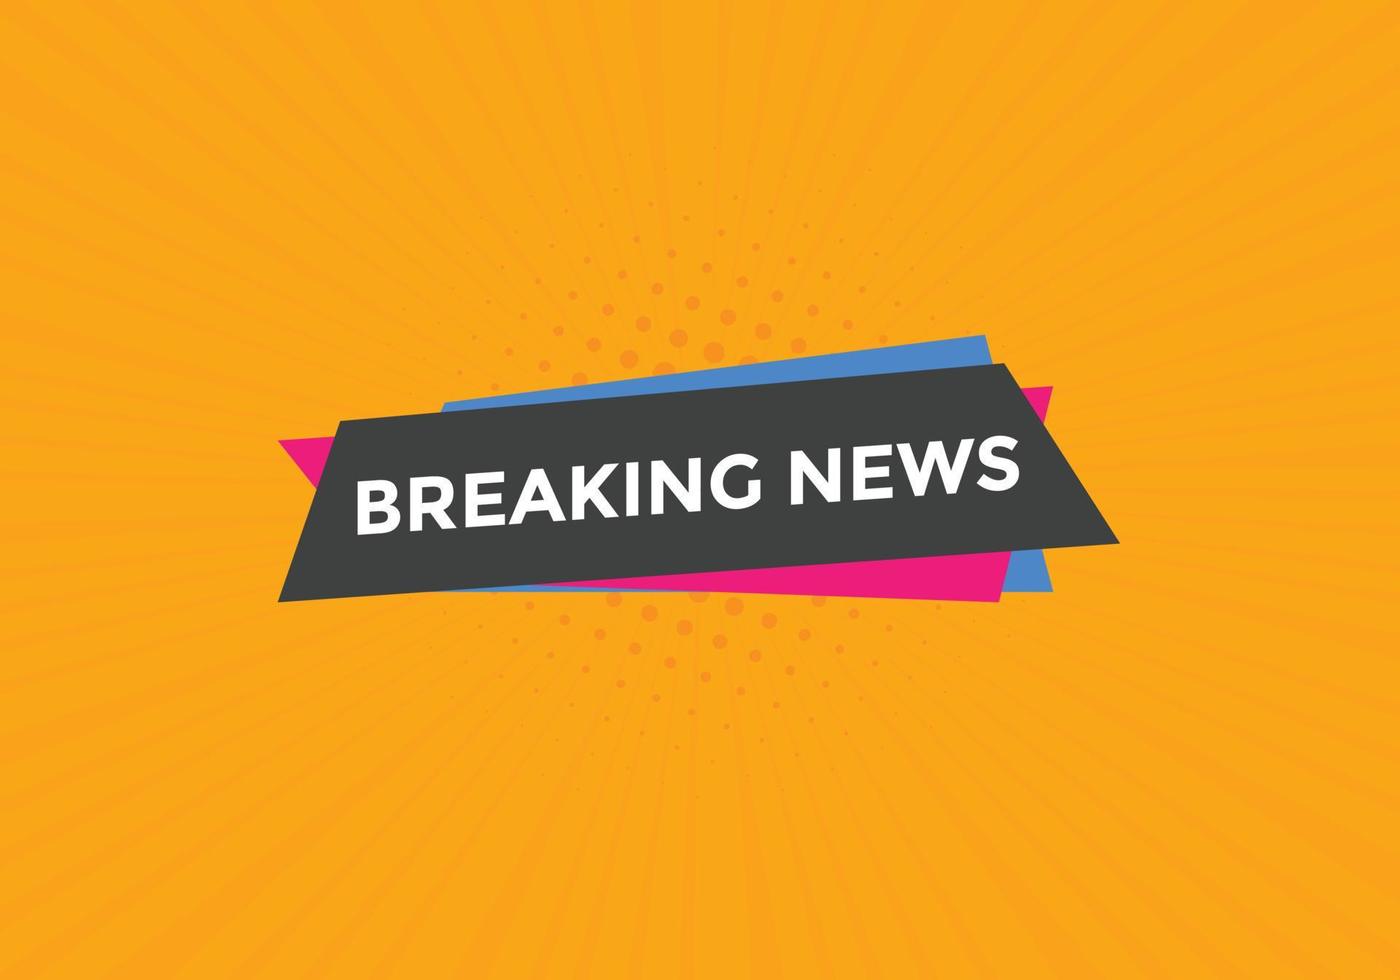 Breaking news button. Breaking news web template. Sign icon banner vector